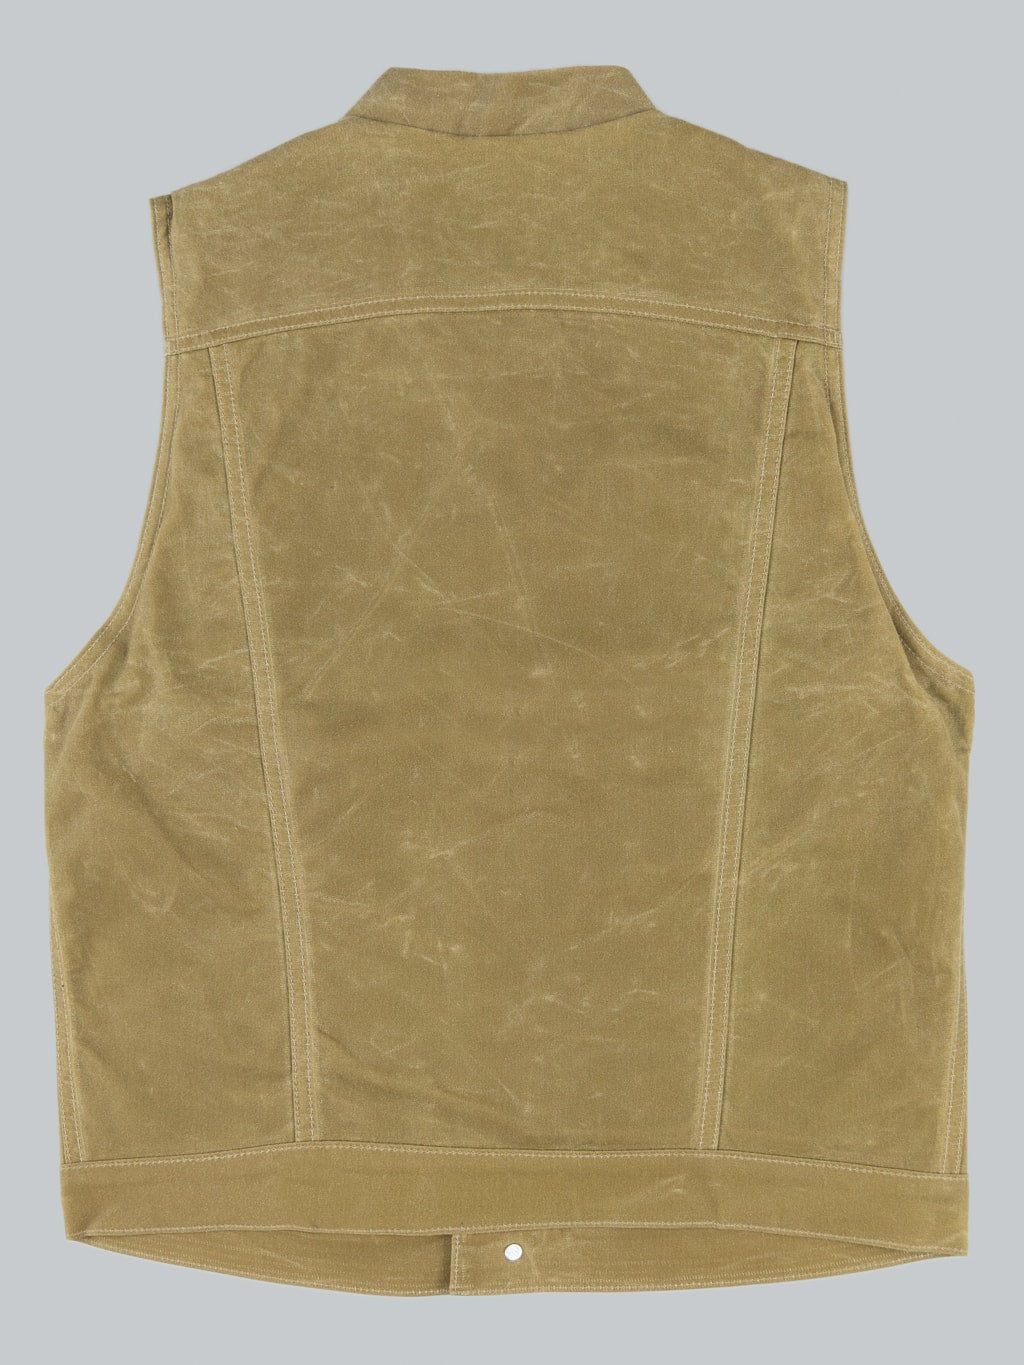 rogue territory lined waxed canvas supply vest 10oz tan back